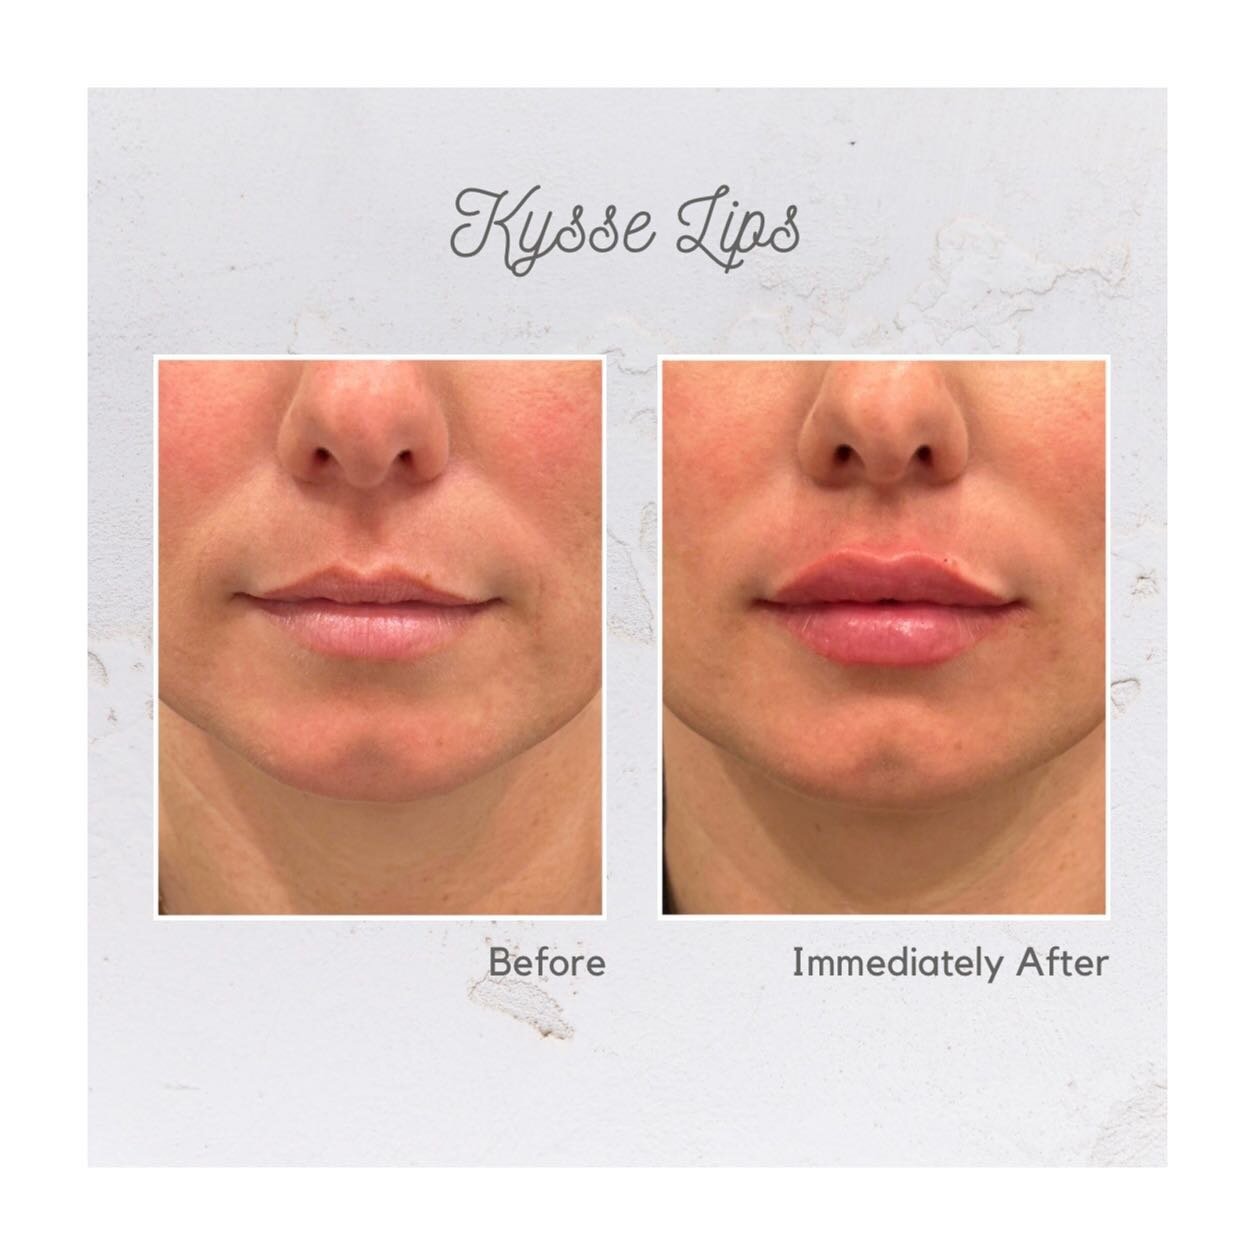 Kysse Lips 💉 👄 

Patients can expect moderate swelling immediately after injection. Oral arnica can be taken several days prior to an appointment to minimize both swelling and potential bruising. 

It&rsquo;s all part of the journey ✌️ 

📲 Book on